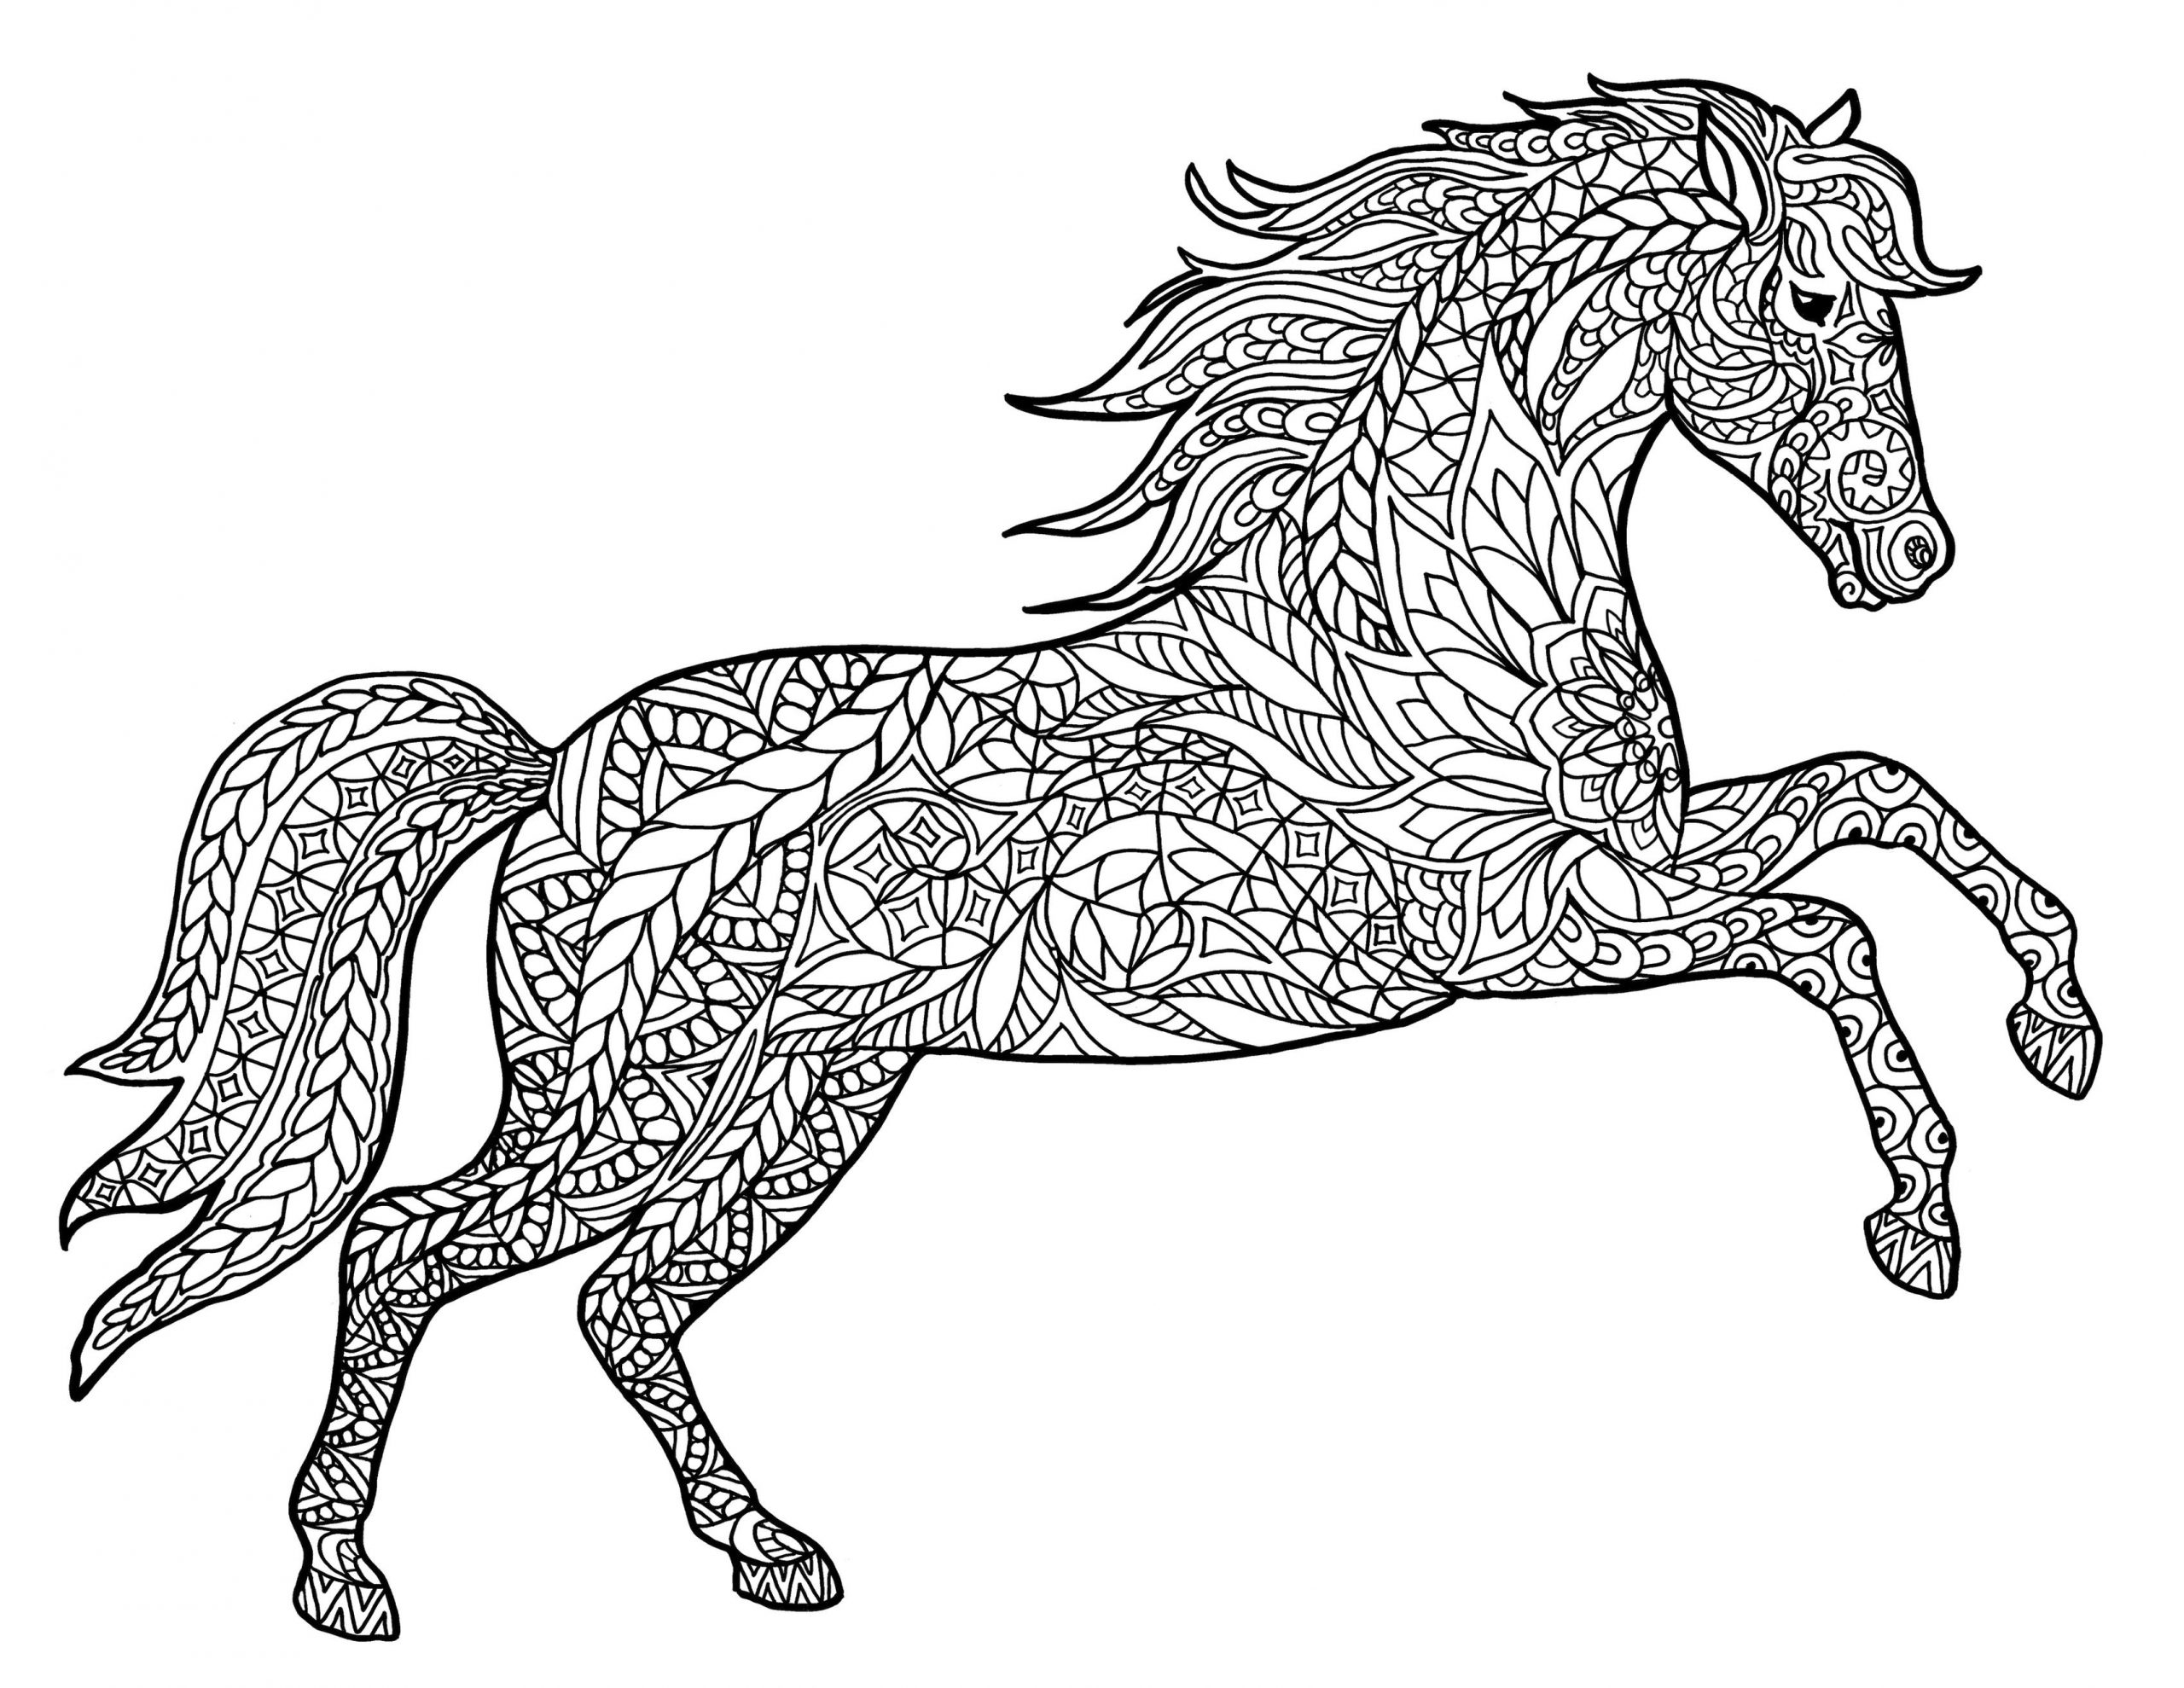 get-this-wolf-coloring-pages-for-adults-free-printable-96993